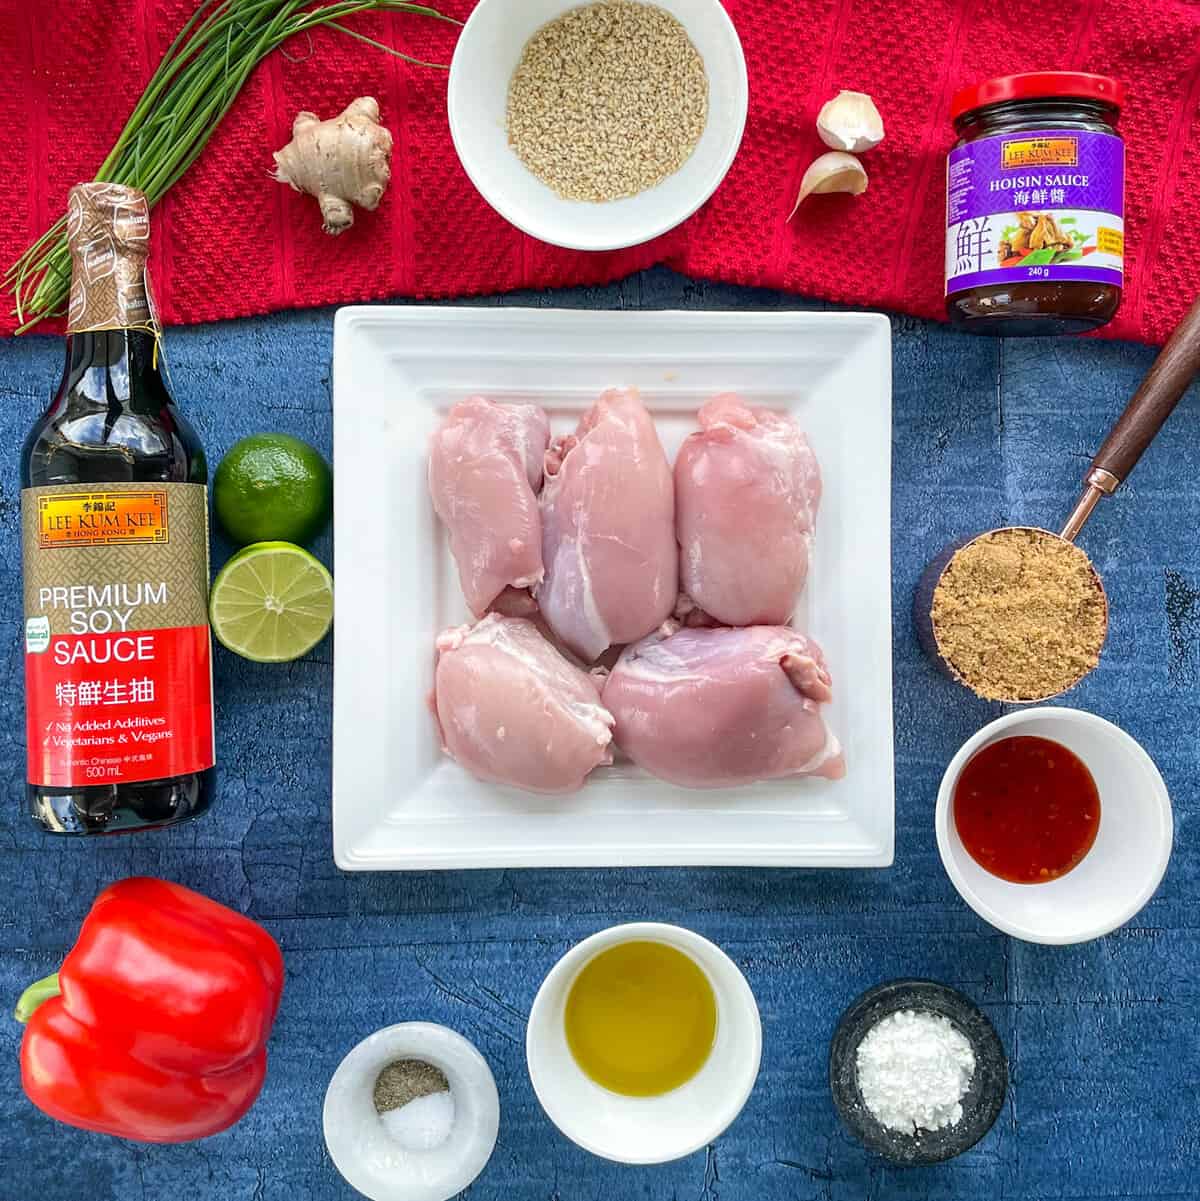 Ingredients used to make sticky asian chicken thighs recipe, see the recipe card for details